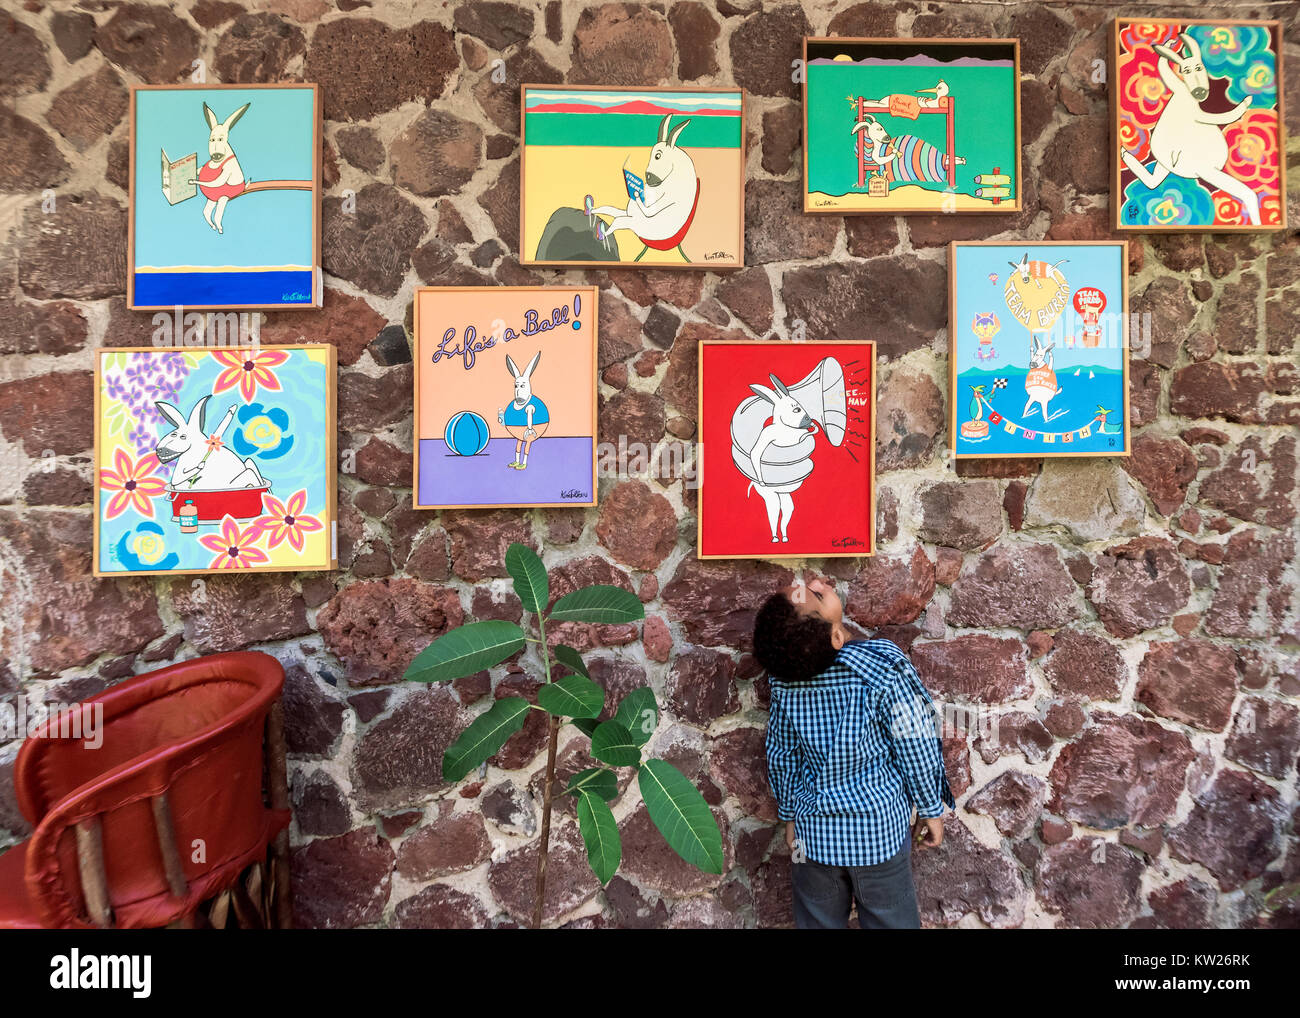 Young art lover admiring the paintings, Yves Restaurant, Ajijic, Mexico Stock Photo